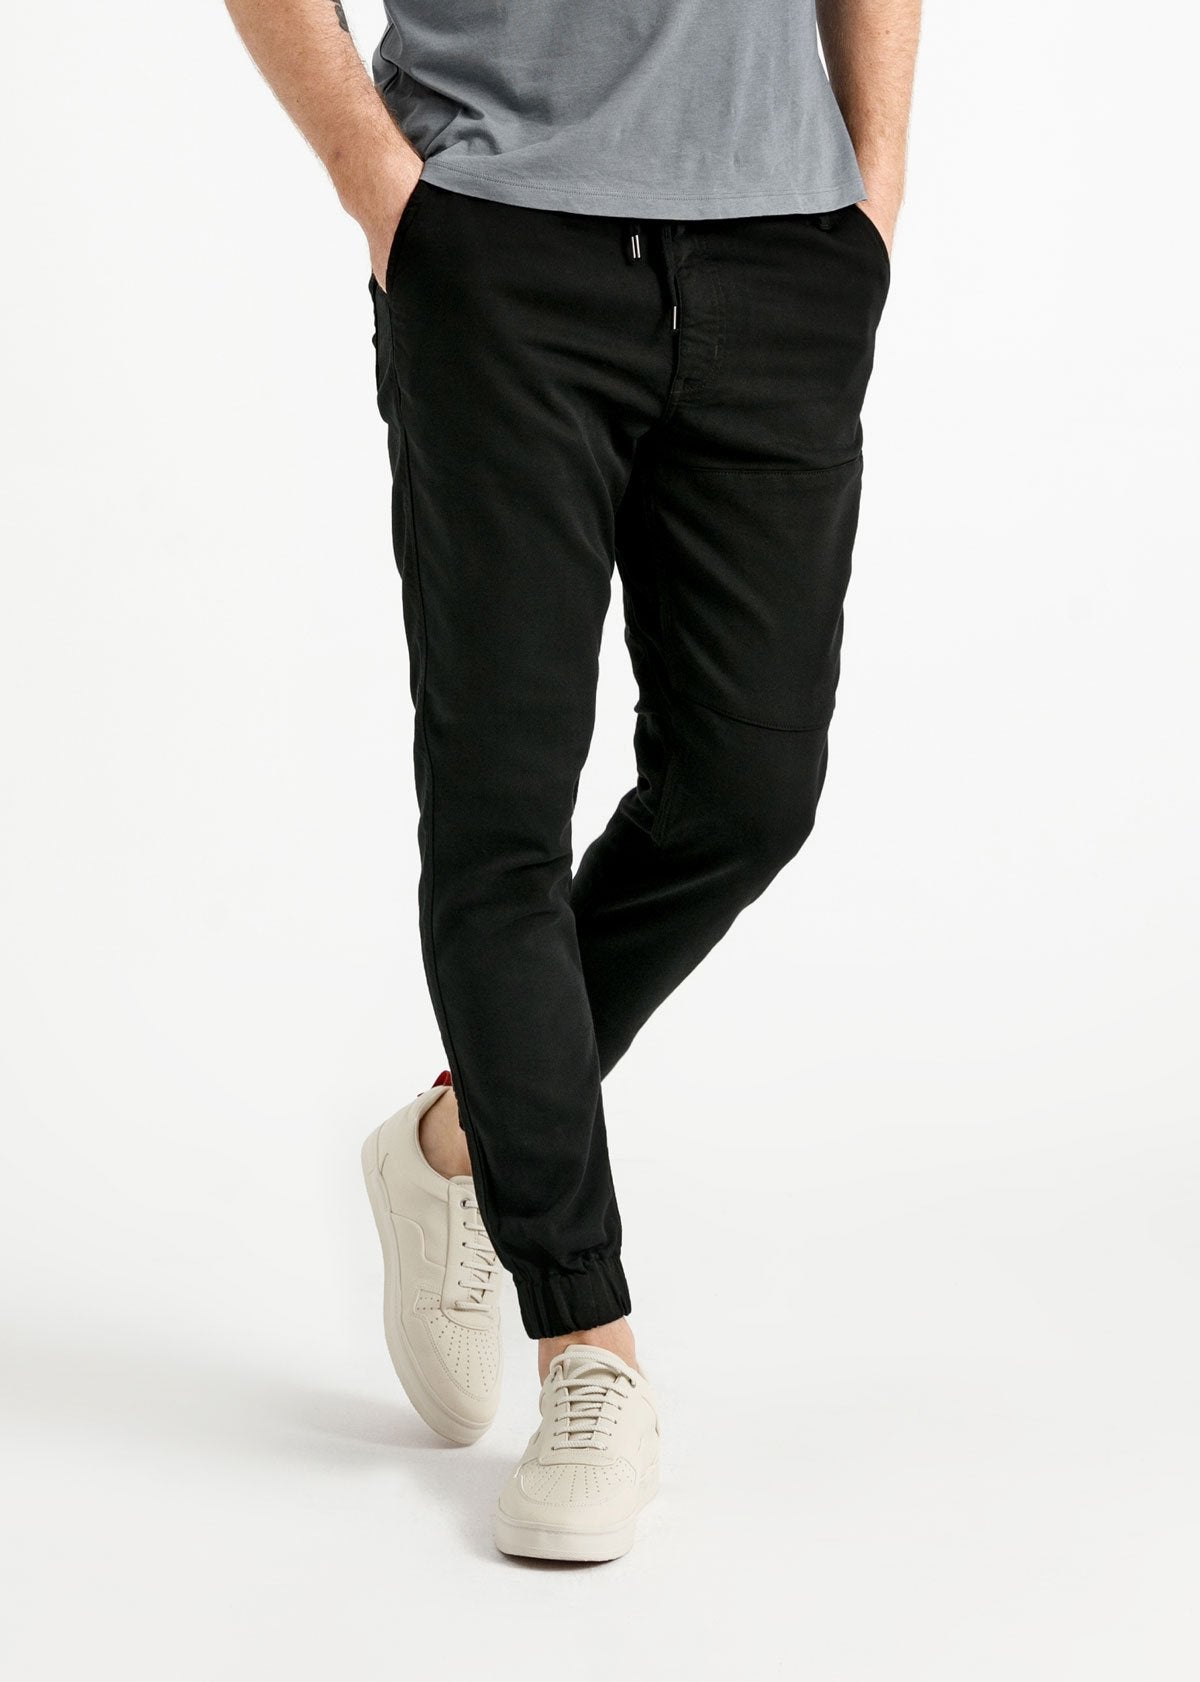 mens black stretch joggers front